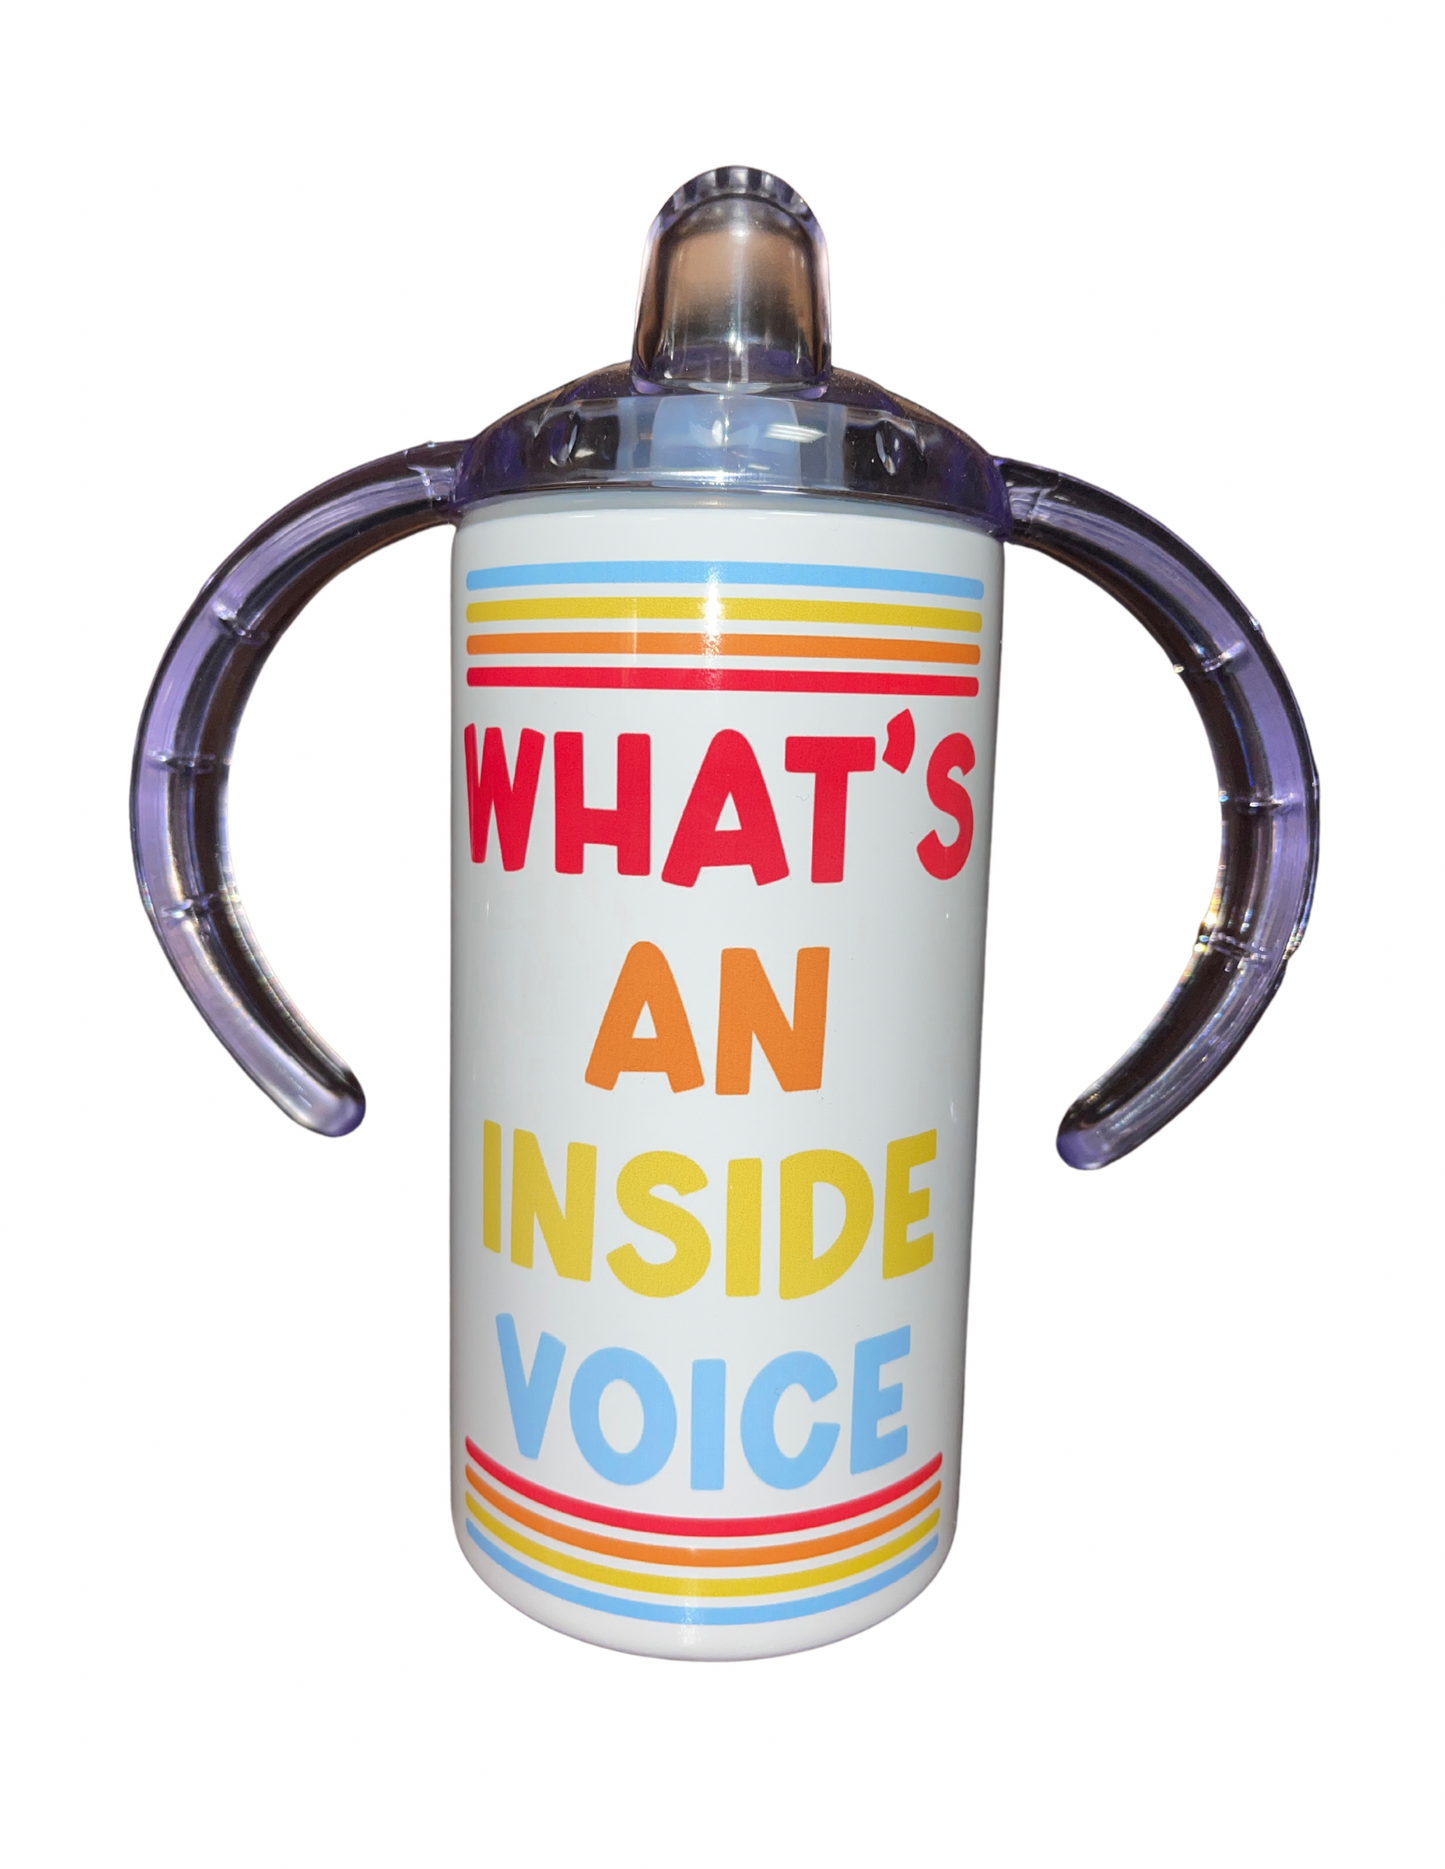 What’s an inside voice